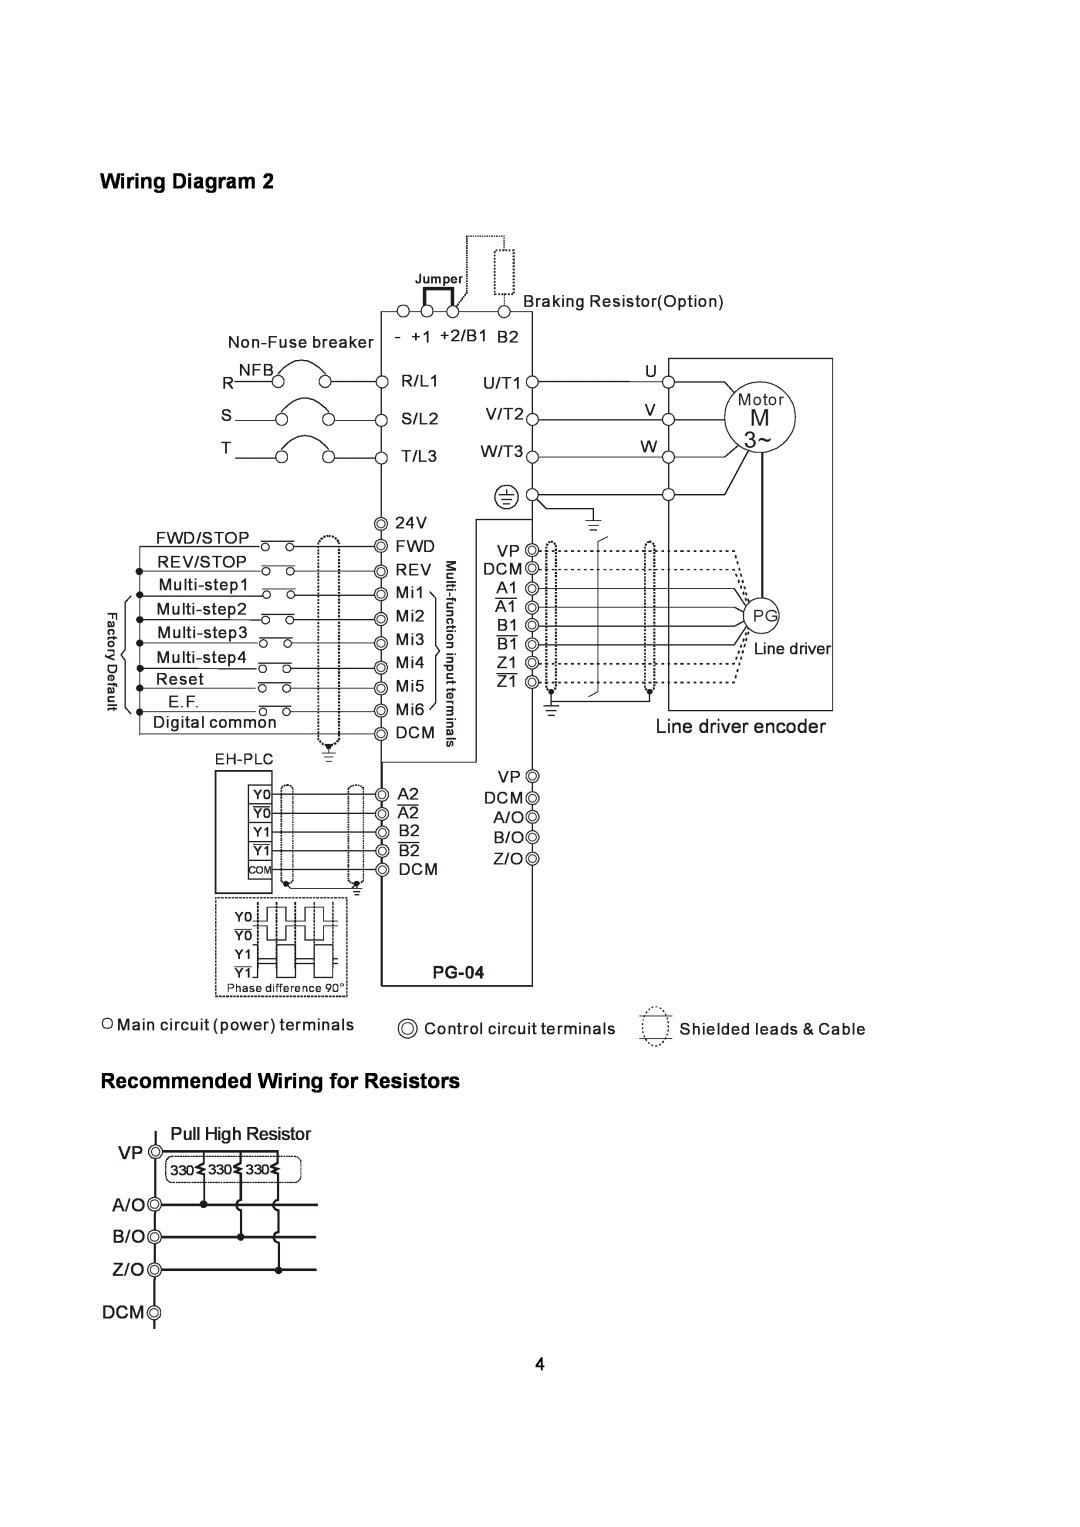 Delta Electronics PG-04 instruction sheet W 3~, Recommended Wiring for Resistors, Wiring Diagram, Line driver encoder 